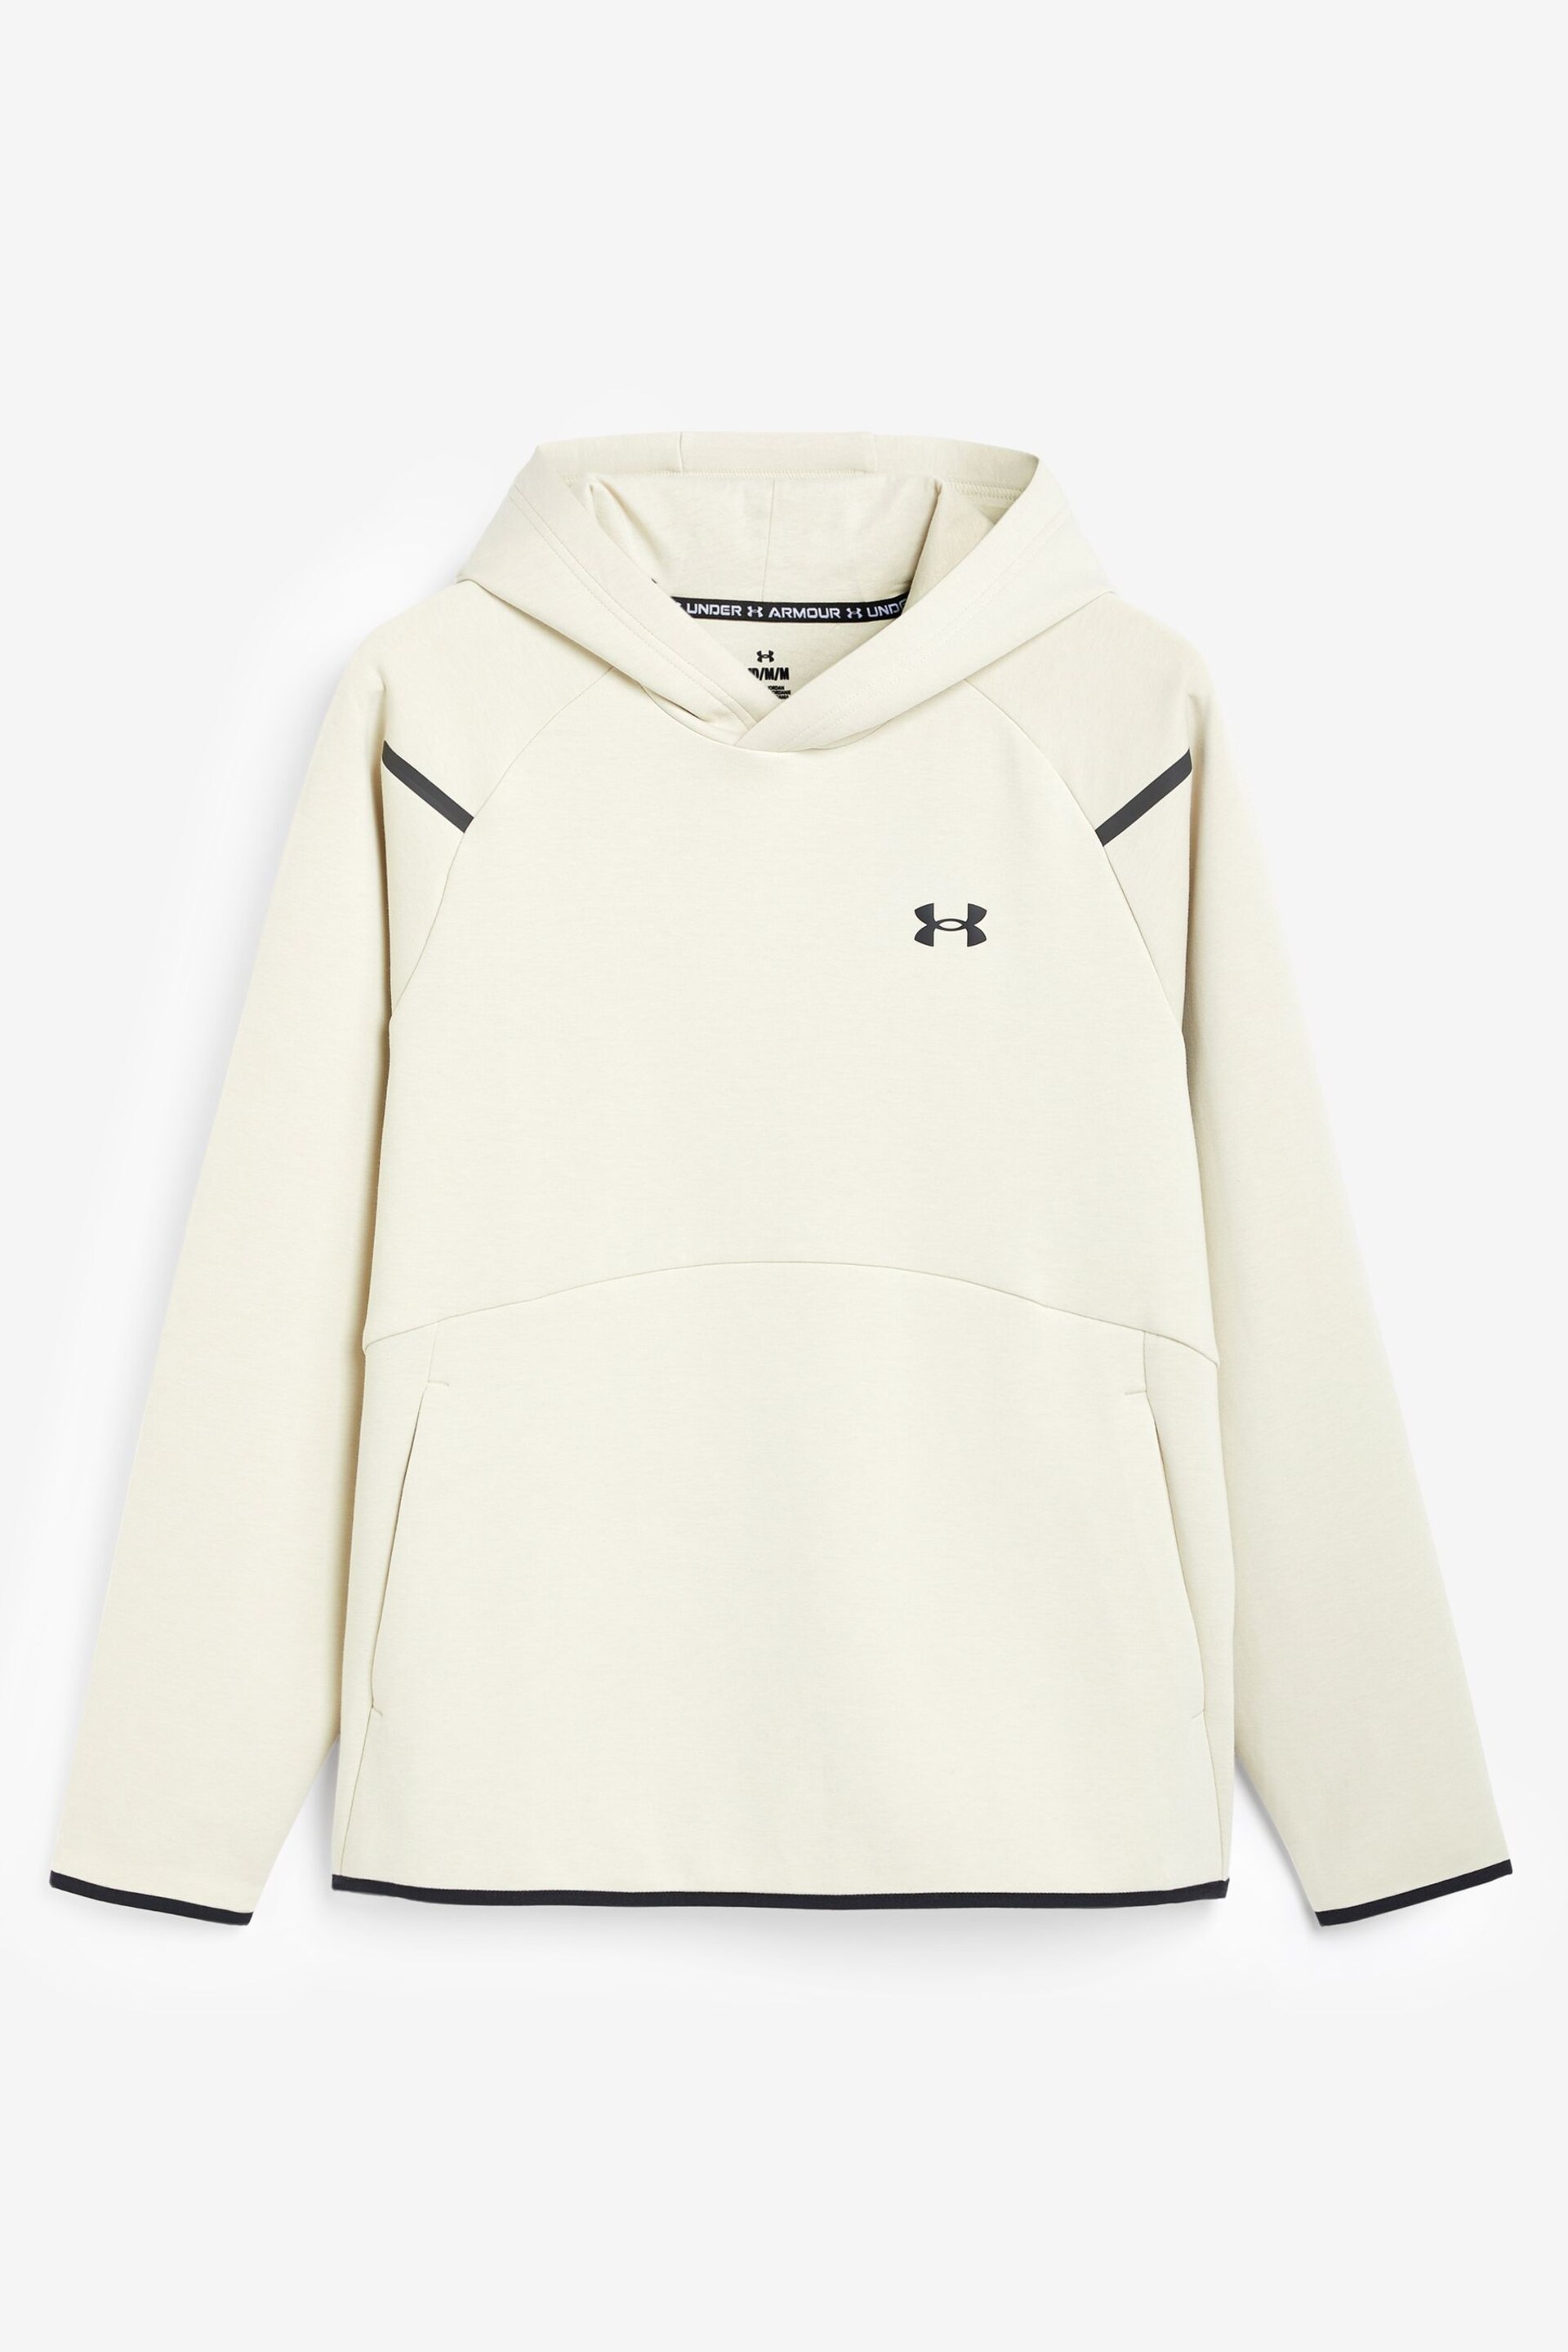 Under Armour Cream Unstoppable Fleece Hoodie - Image 5 of 5